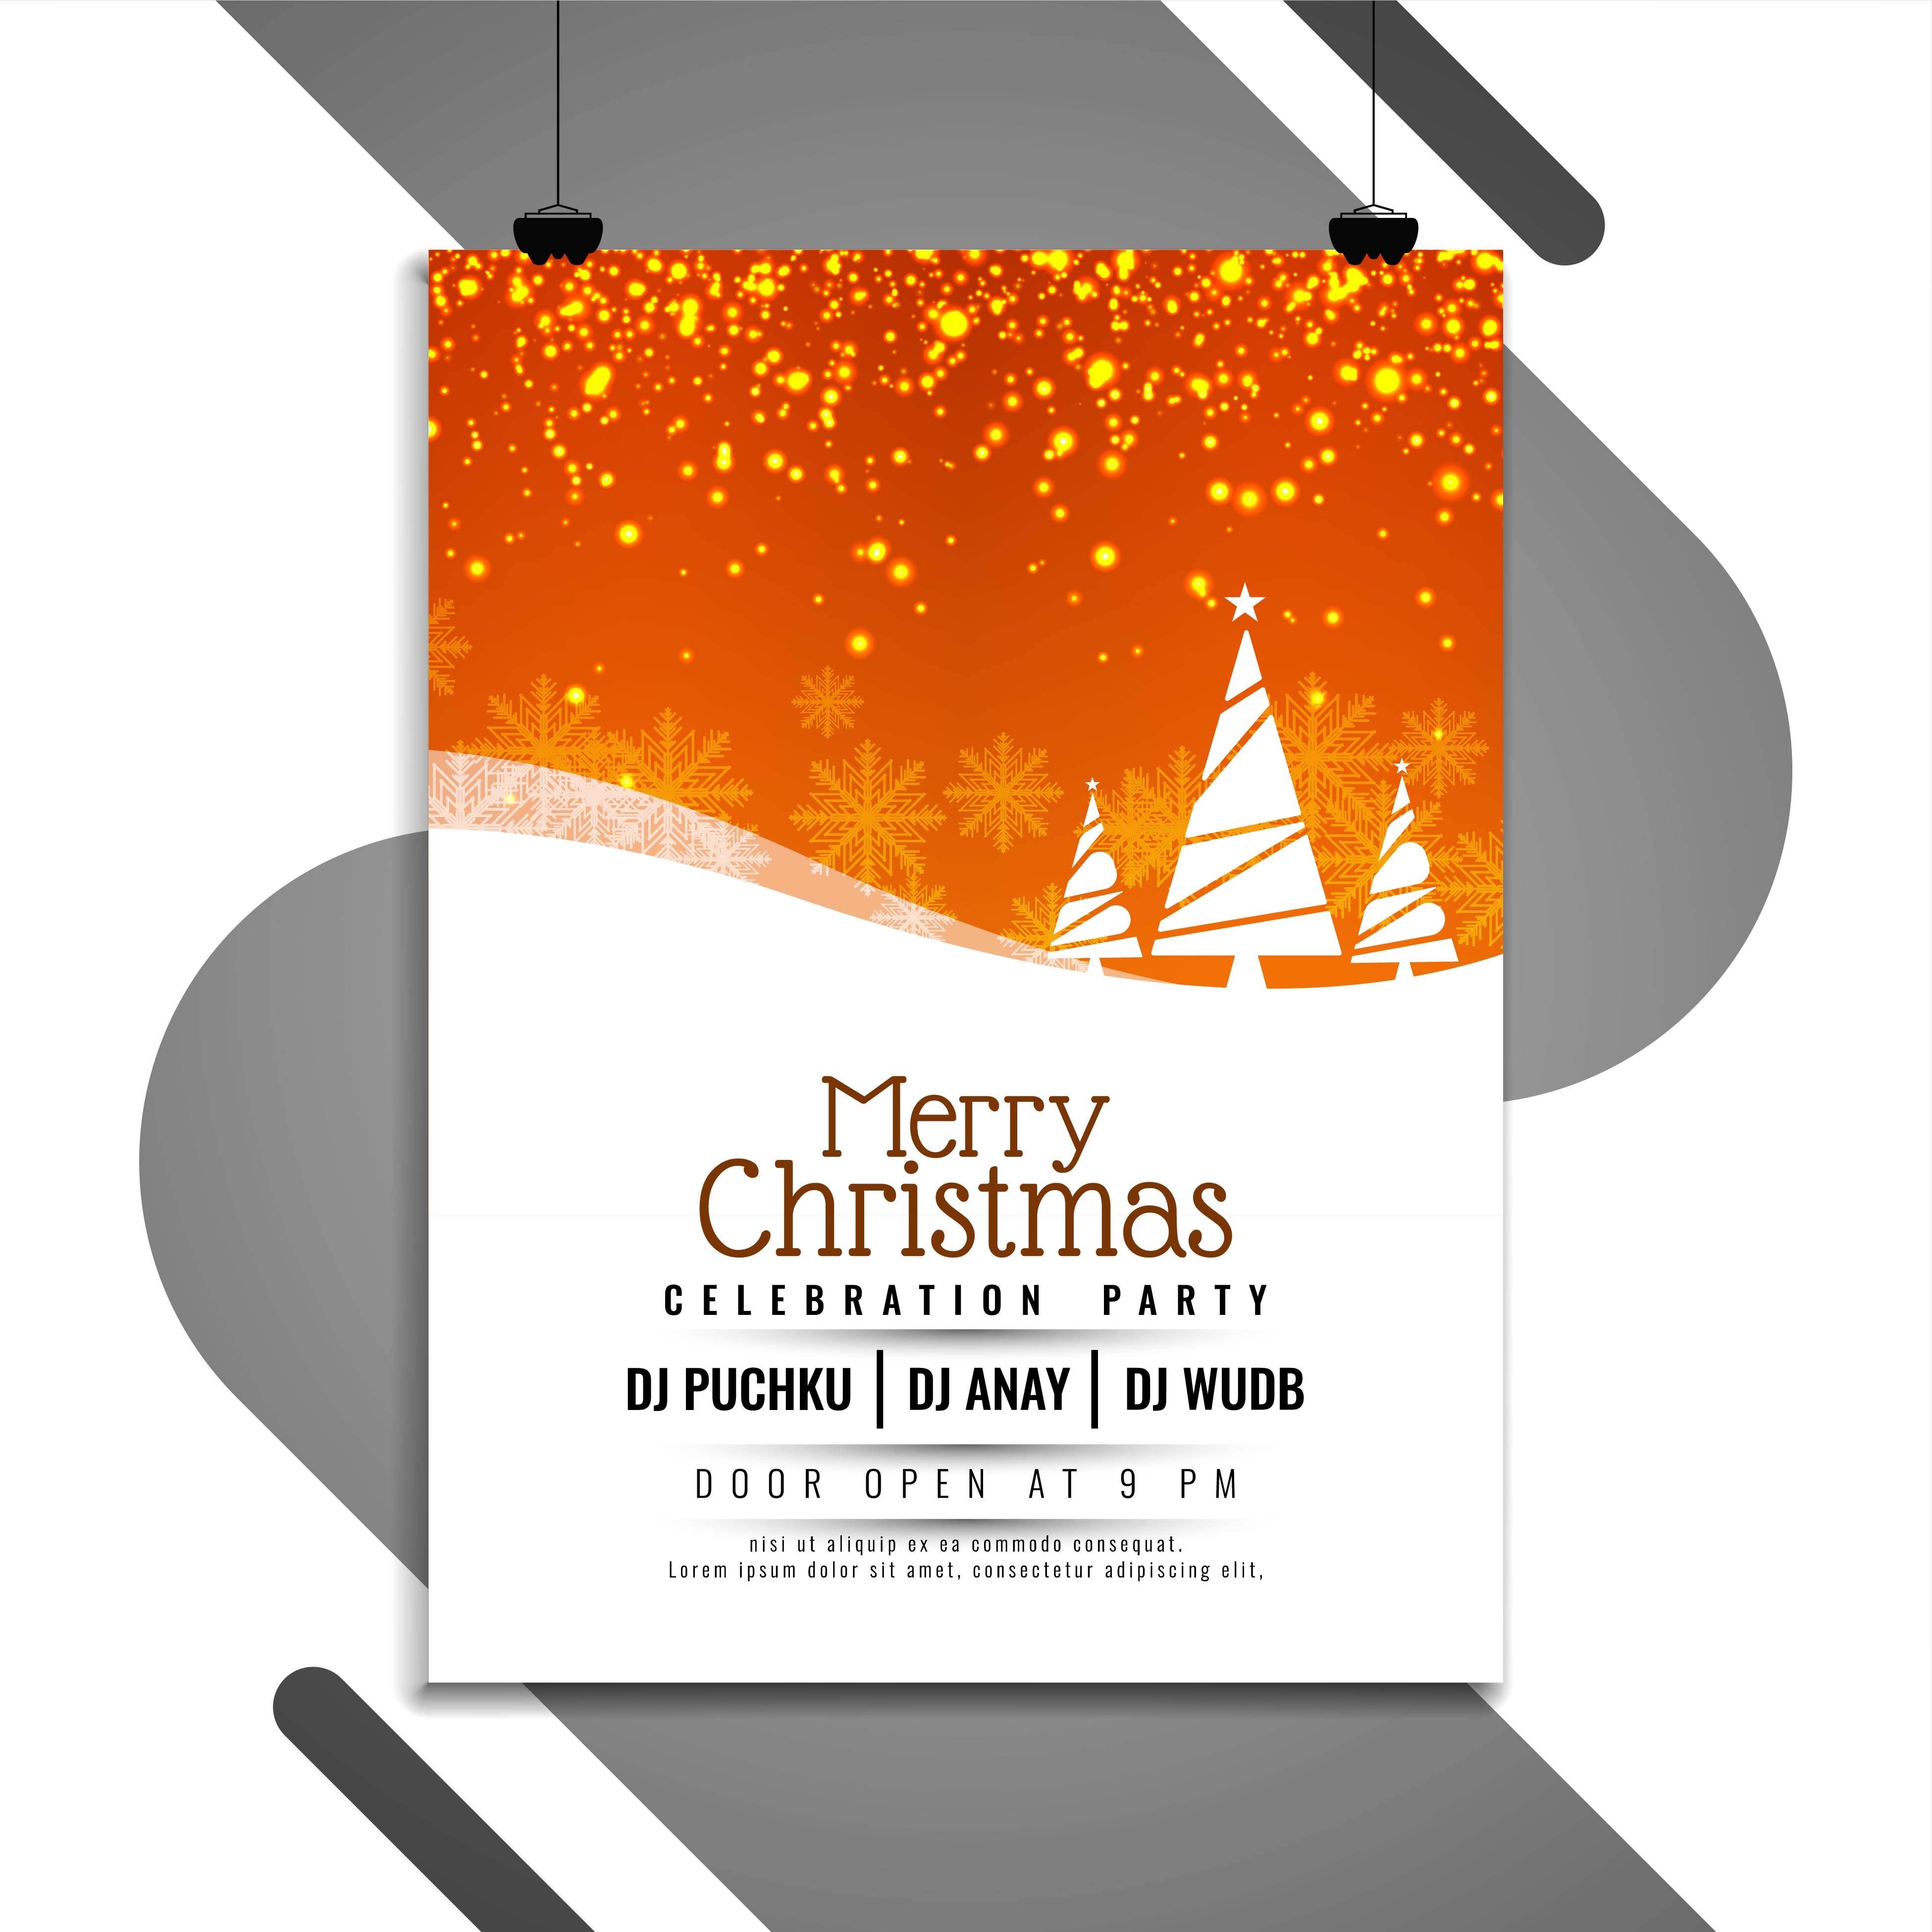 Abstract Merry Christmas Celebration Modern Flyer Design Download Free Vectors Clipart Graphics Vector Art